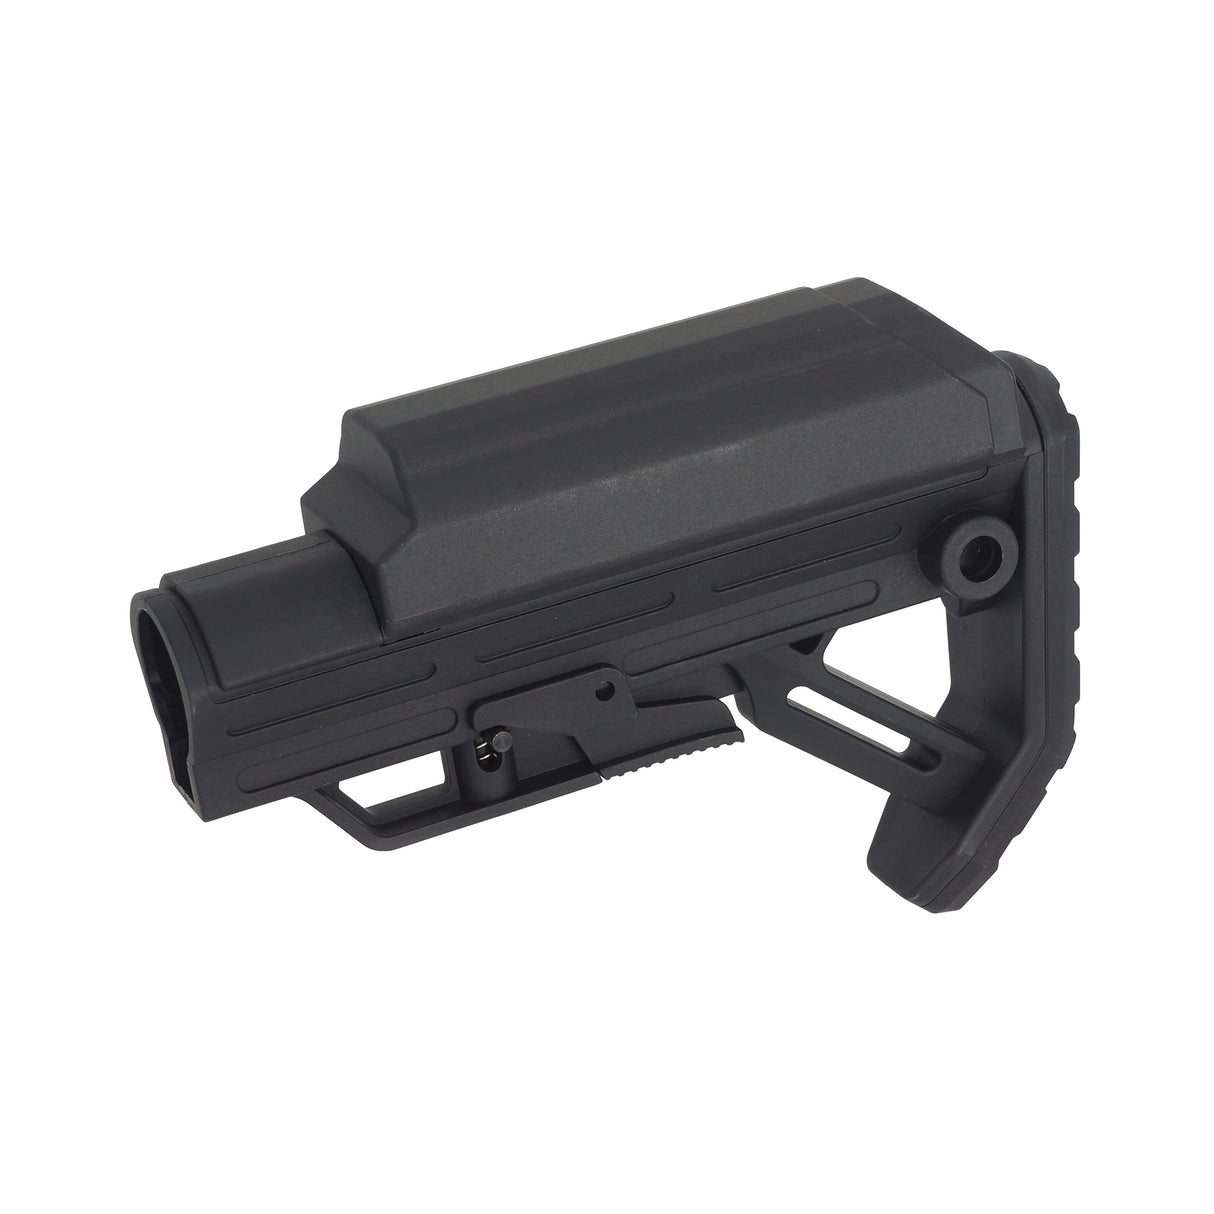 Golden Eagle Retractable Battery Stock for AR / M4 ( GE-M-218 )